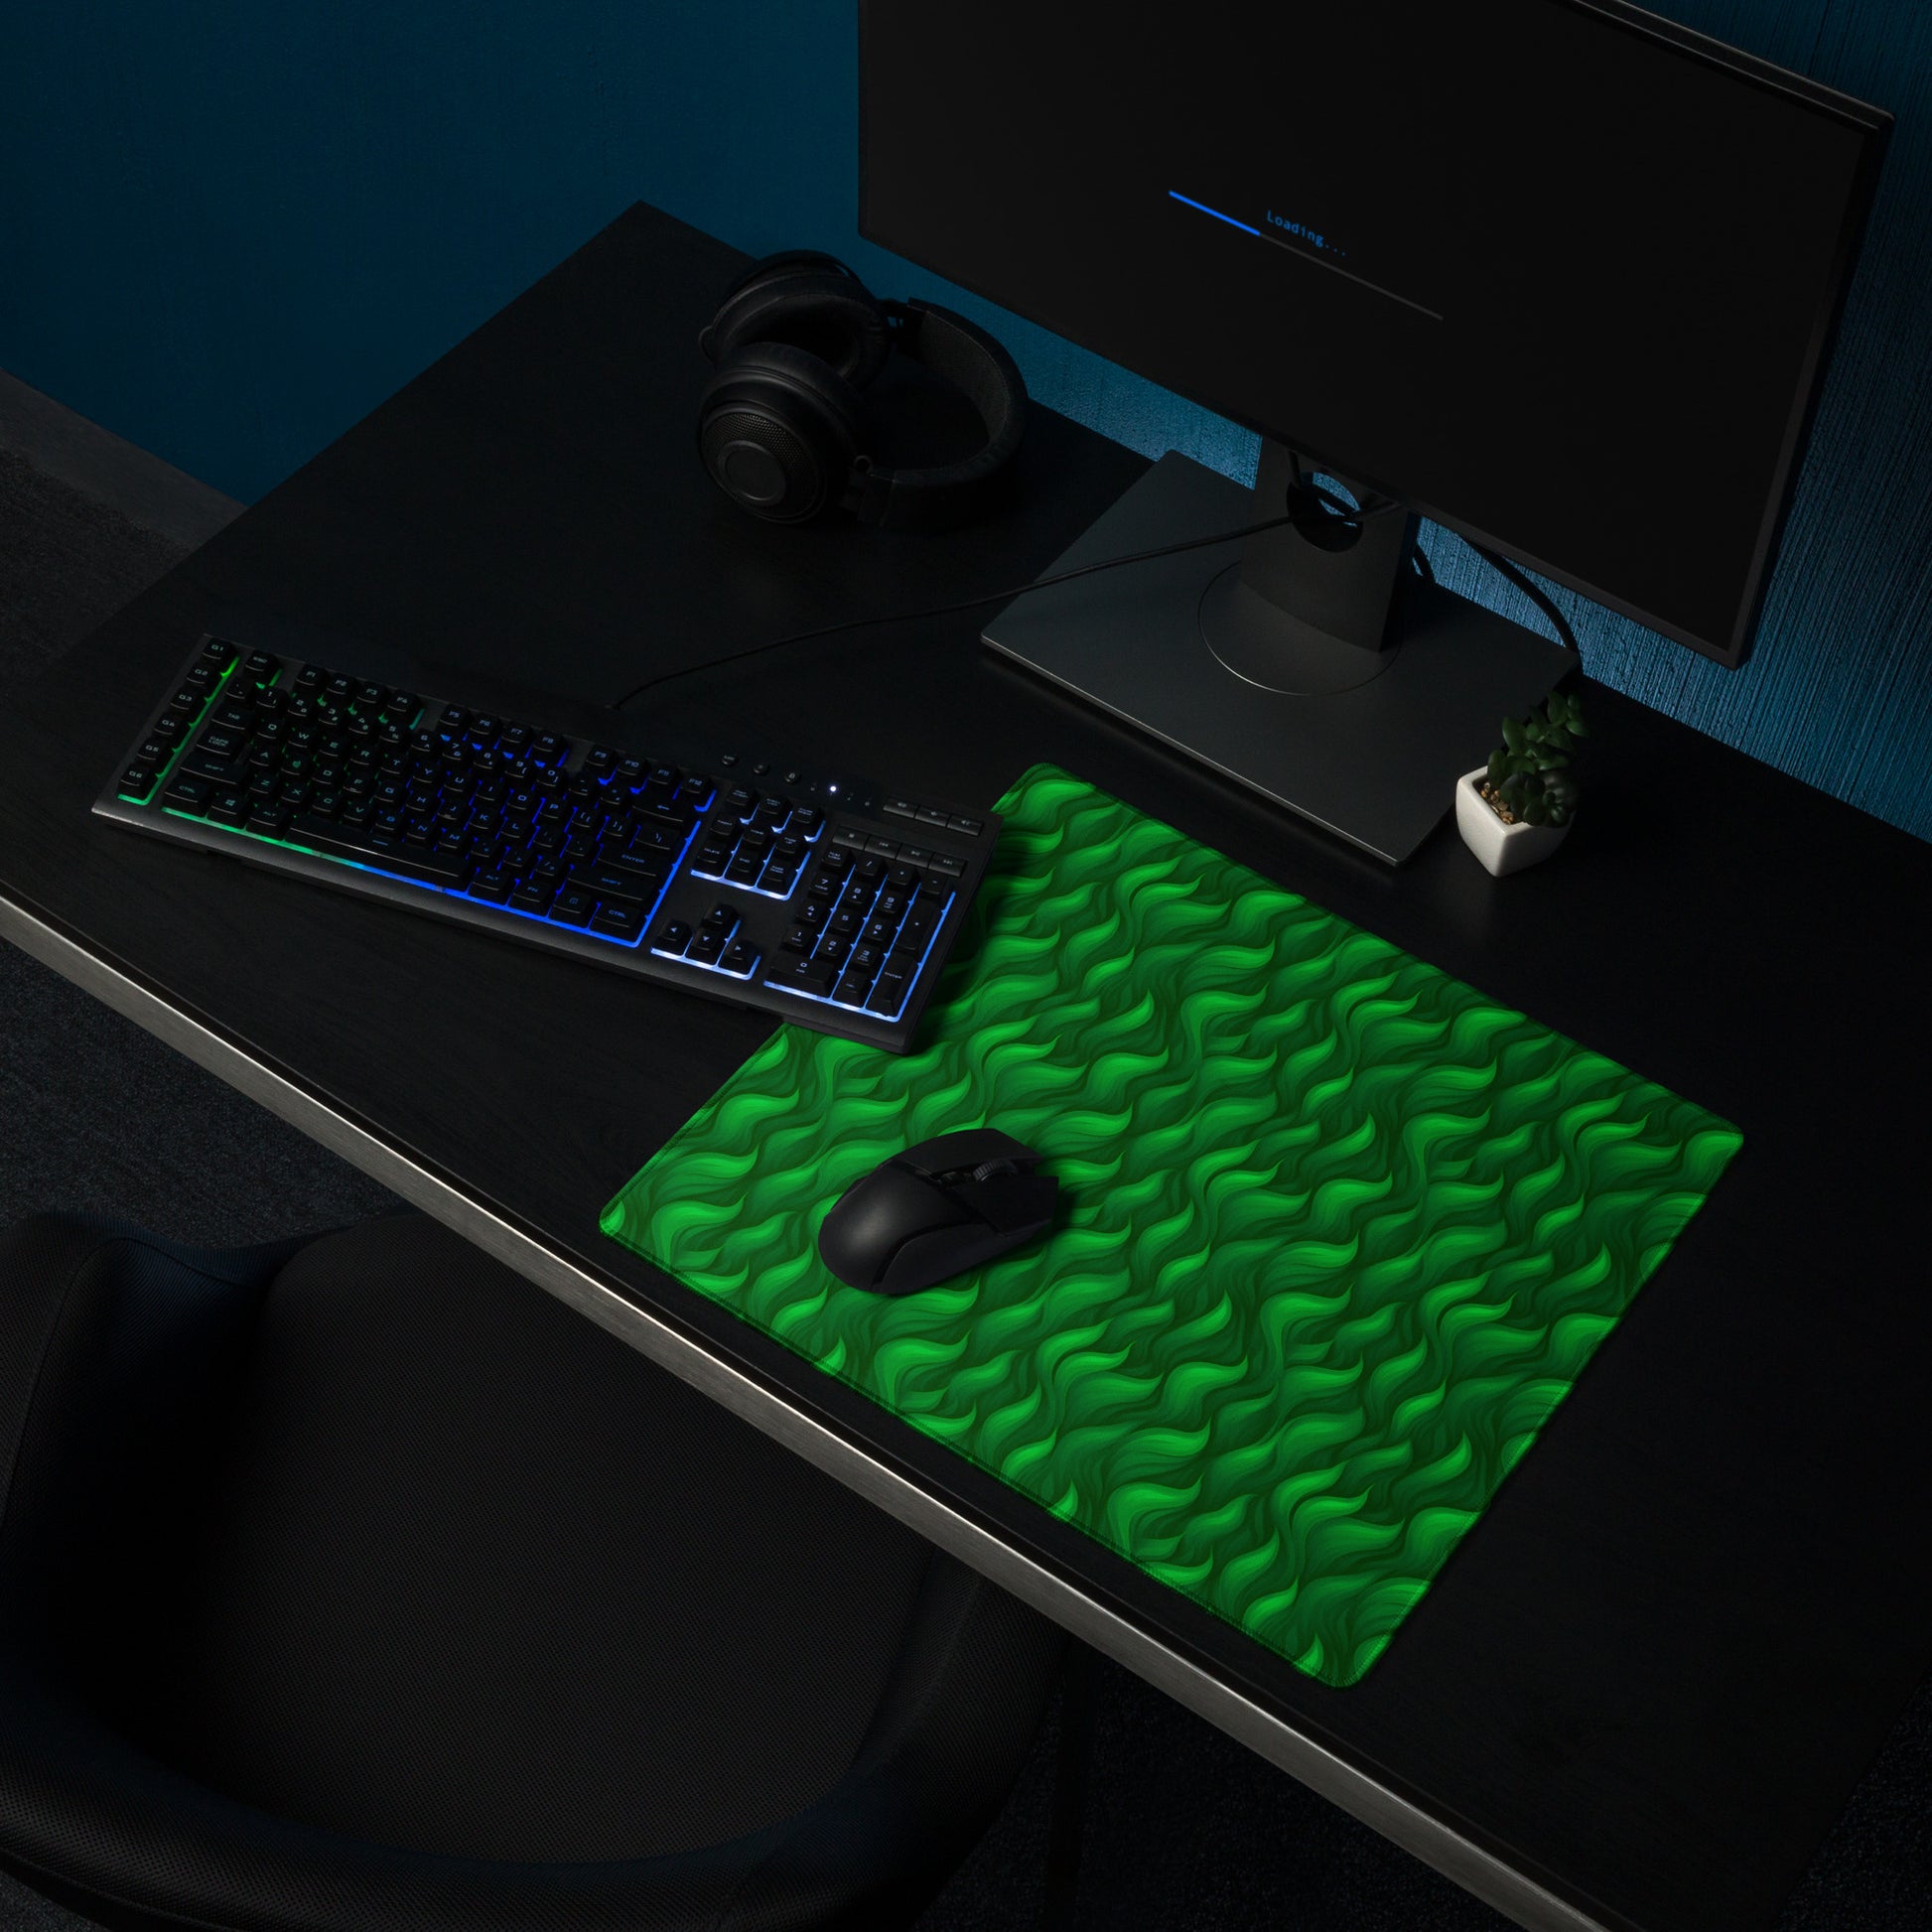 A 18" x 16" desk pad with a wavy flame pattern on it shown on a desk setup. Green in color.